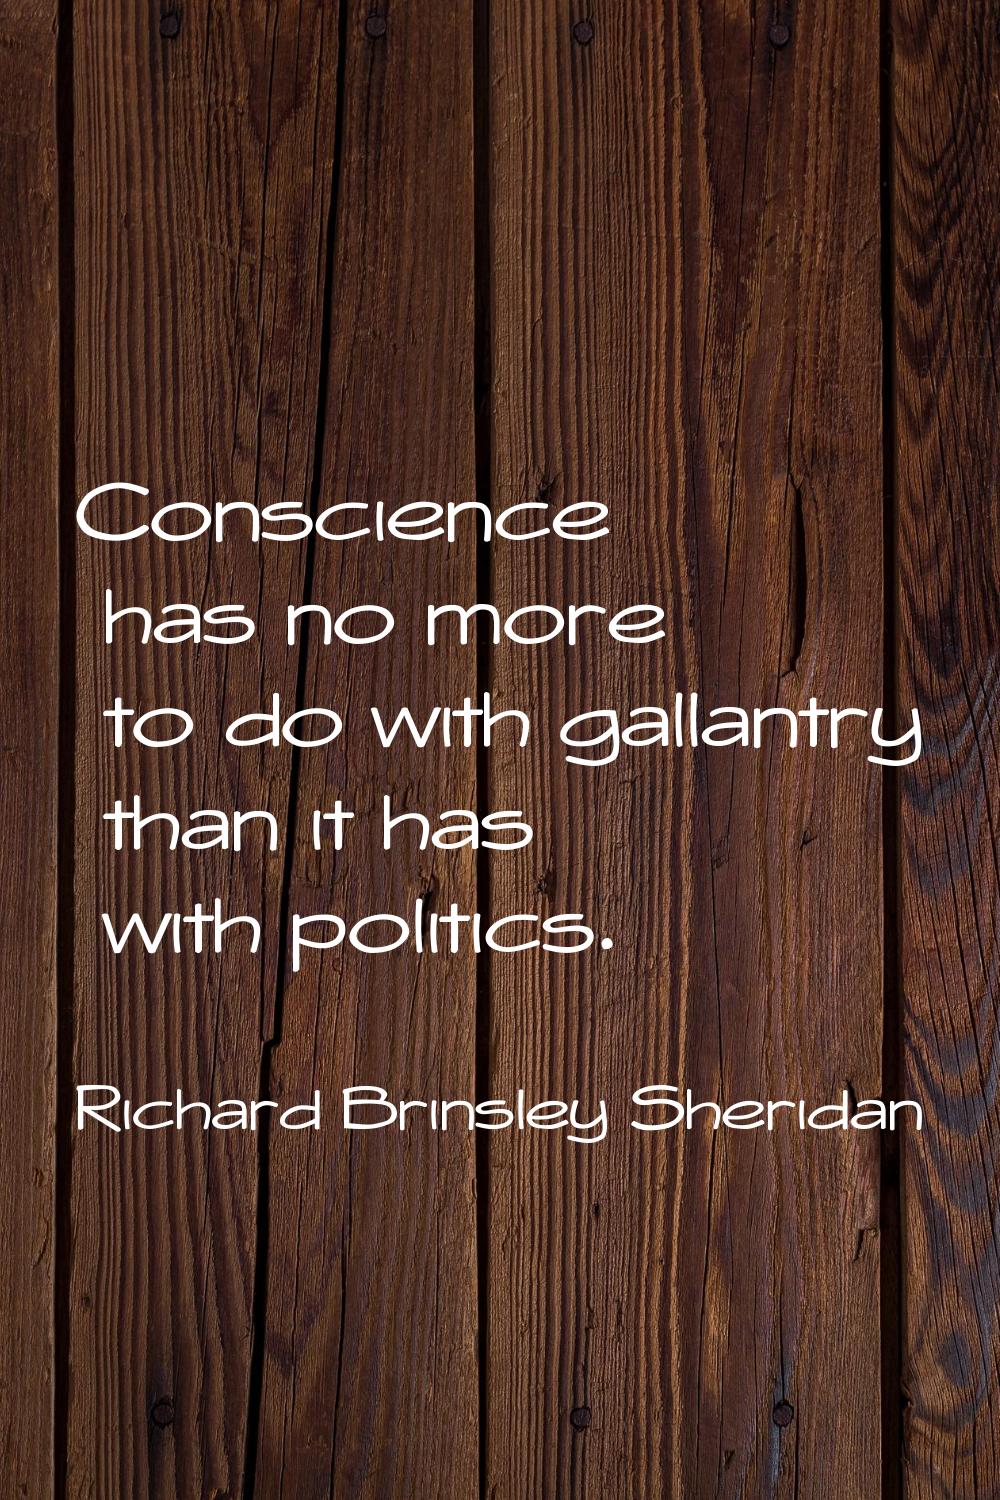 Conscience has no more to do with gallantry than it has with politics.